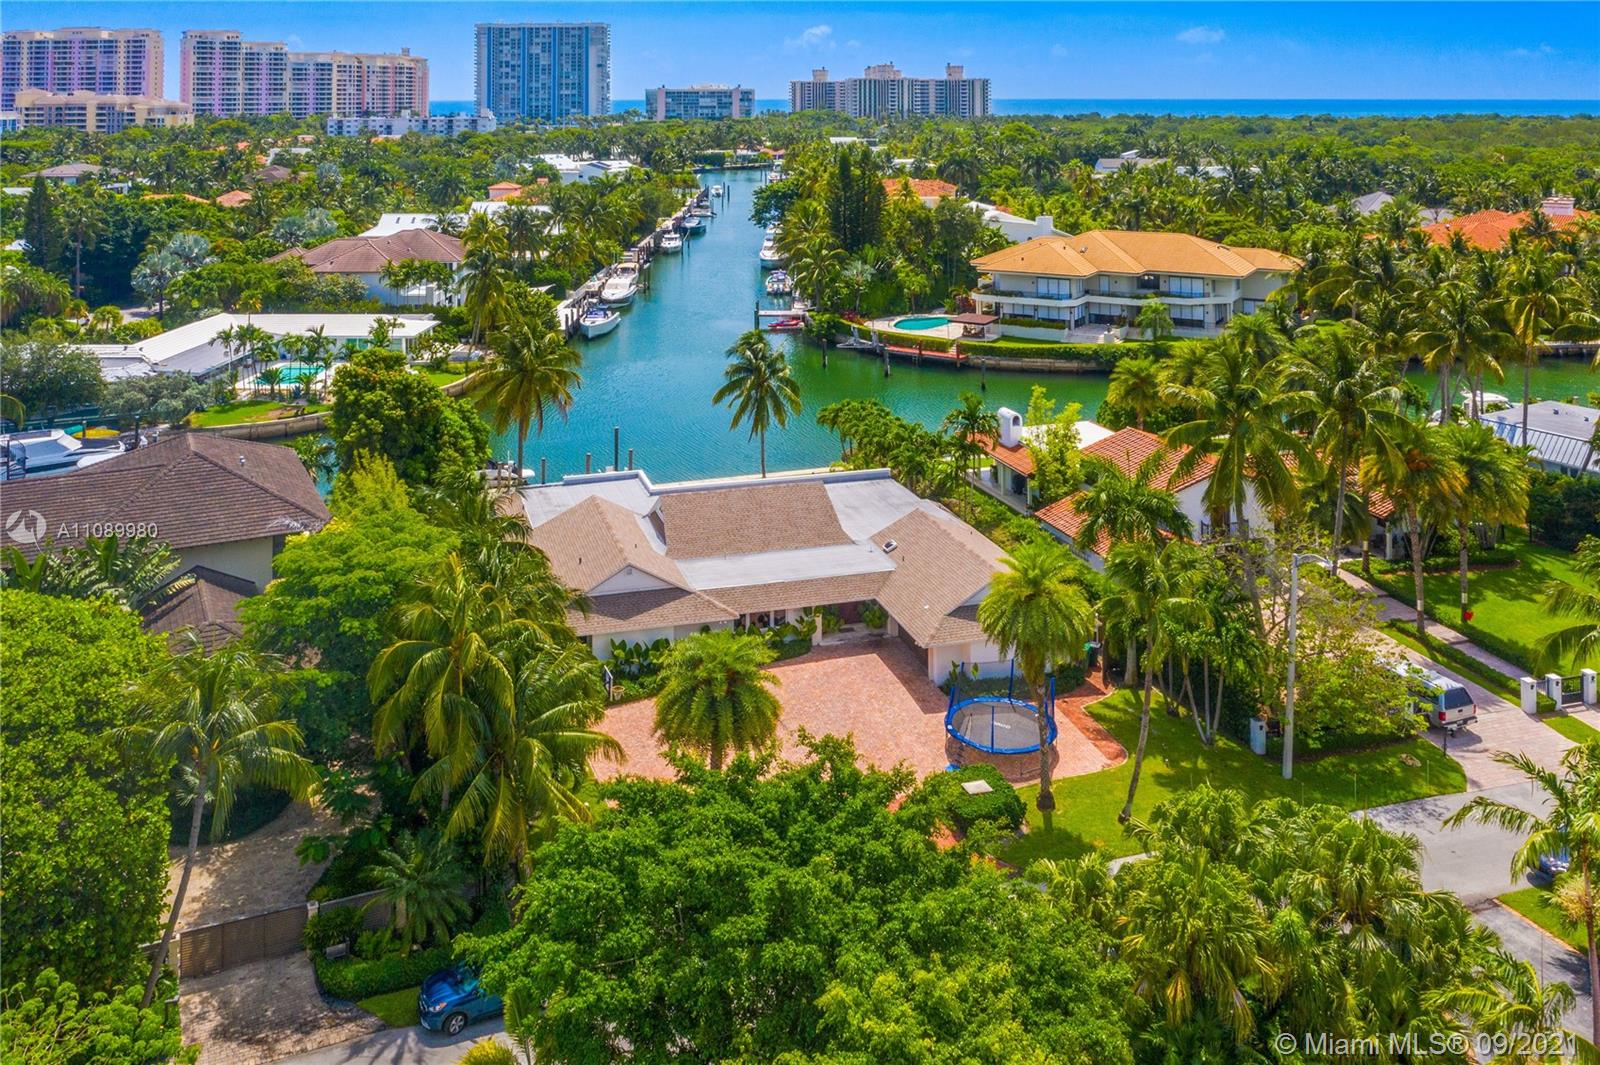 Incredible location in one of Key Biscayne’s most desired streets … “Mariner Drive” which is private, quiet, secure and one of the highest streets on KB with 15,893 Sq Ft of land.  A true yachtsman’s paradise with over 100 feet on the water and amazing endless views down the canal with easy access to the bay.  This one story residence is open, bright and has natural light throughout with high ceilings in the living area.  Offering 5 ample bedrooms, 4 bathrooms, 1 cabana bath, office, separate living and dining room, spacious family area, garage, dock, and an oversized gorgeous infinity pool with a great terrace for those who like to entertain.  Rare opportunity to own this magnificent property which is all about location. Tenant occupied until February 2022. (see broker remarks)